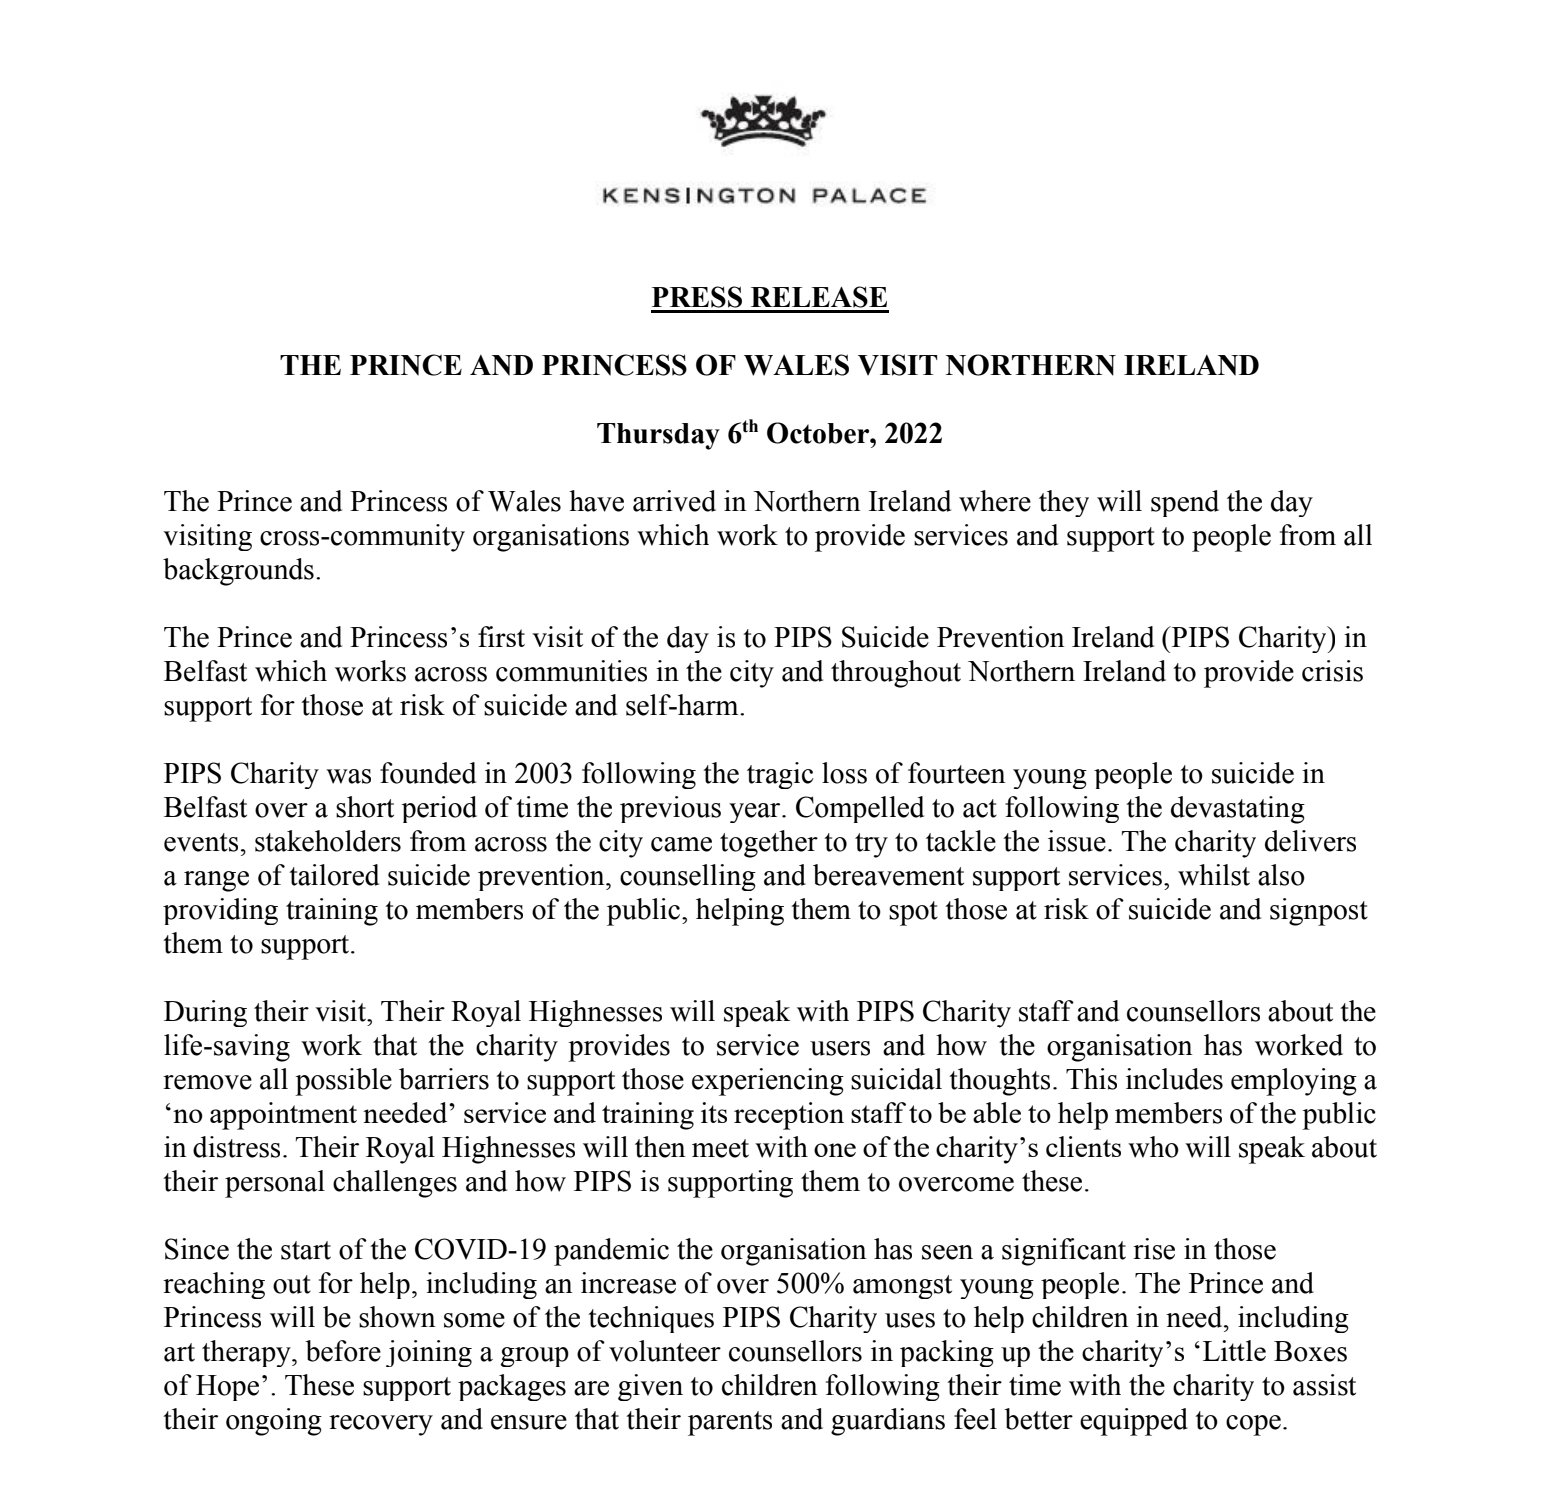 Full statement on Prince William Kate latest visit released